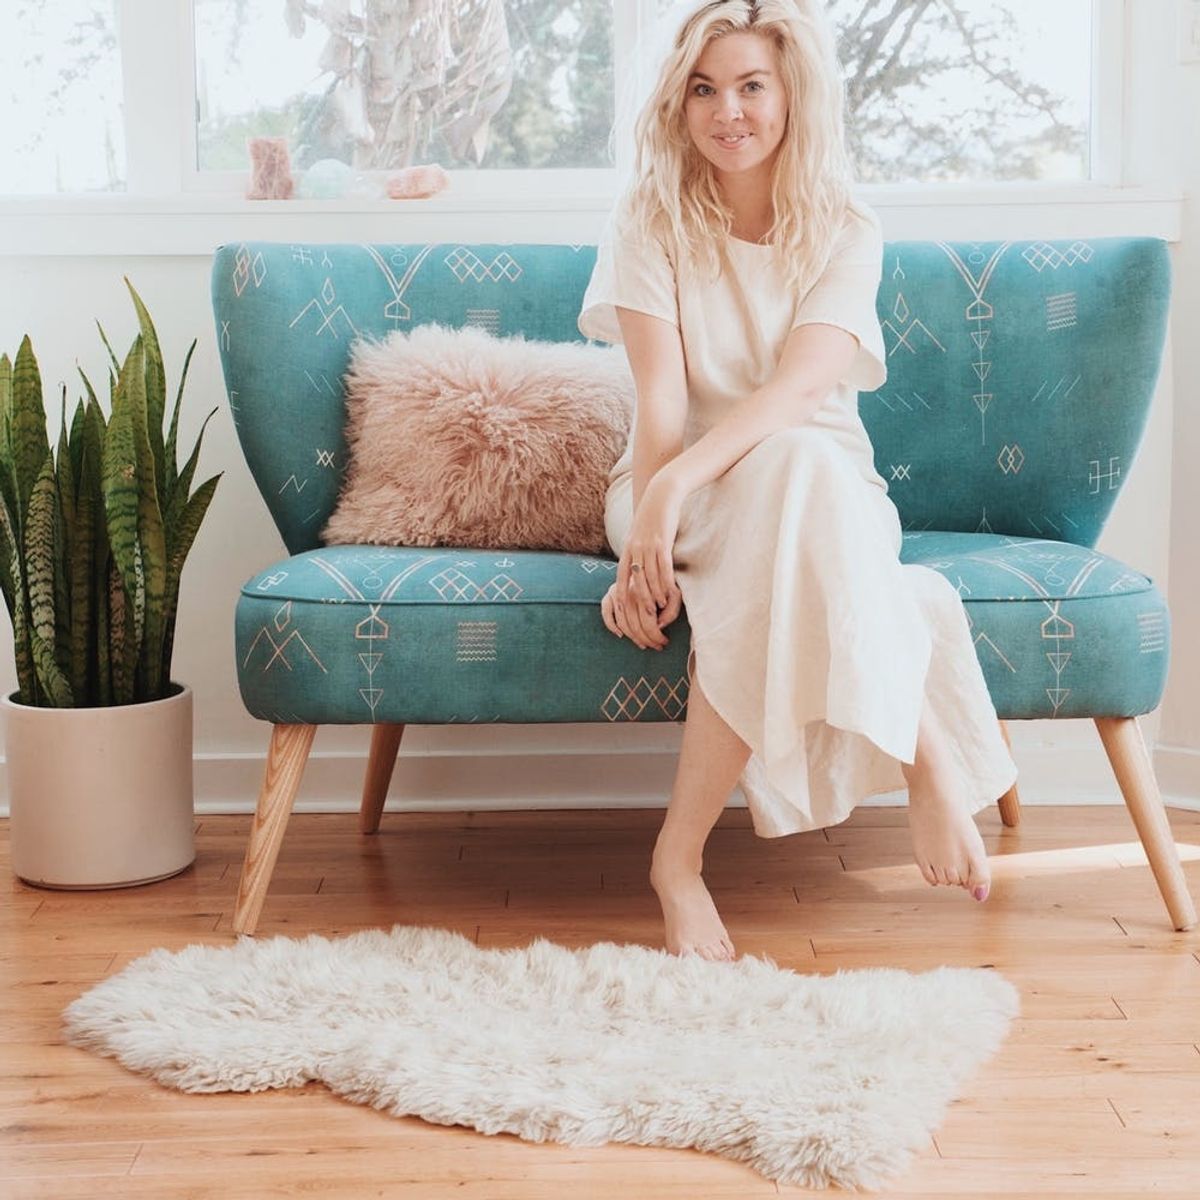 Target’s New Cloth & Company x Designlovefest Home Collab Has Us Dreaming of Spring